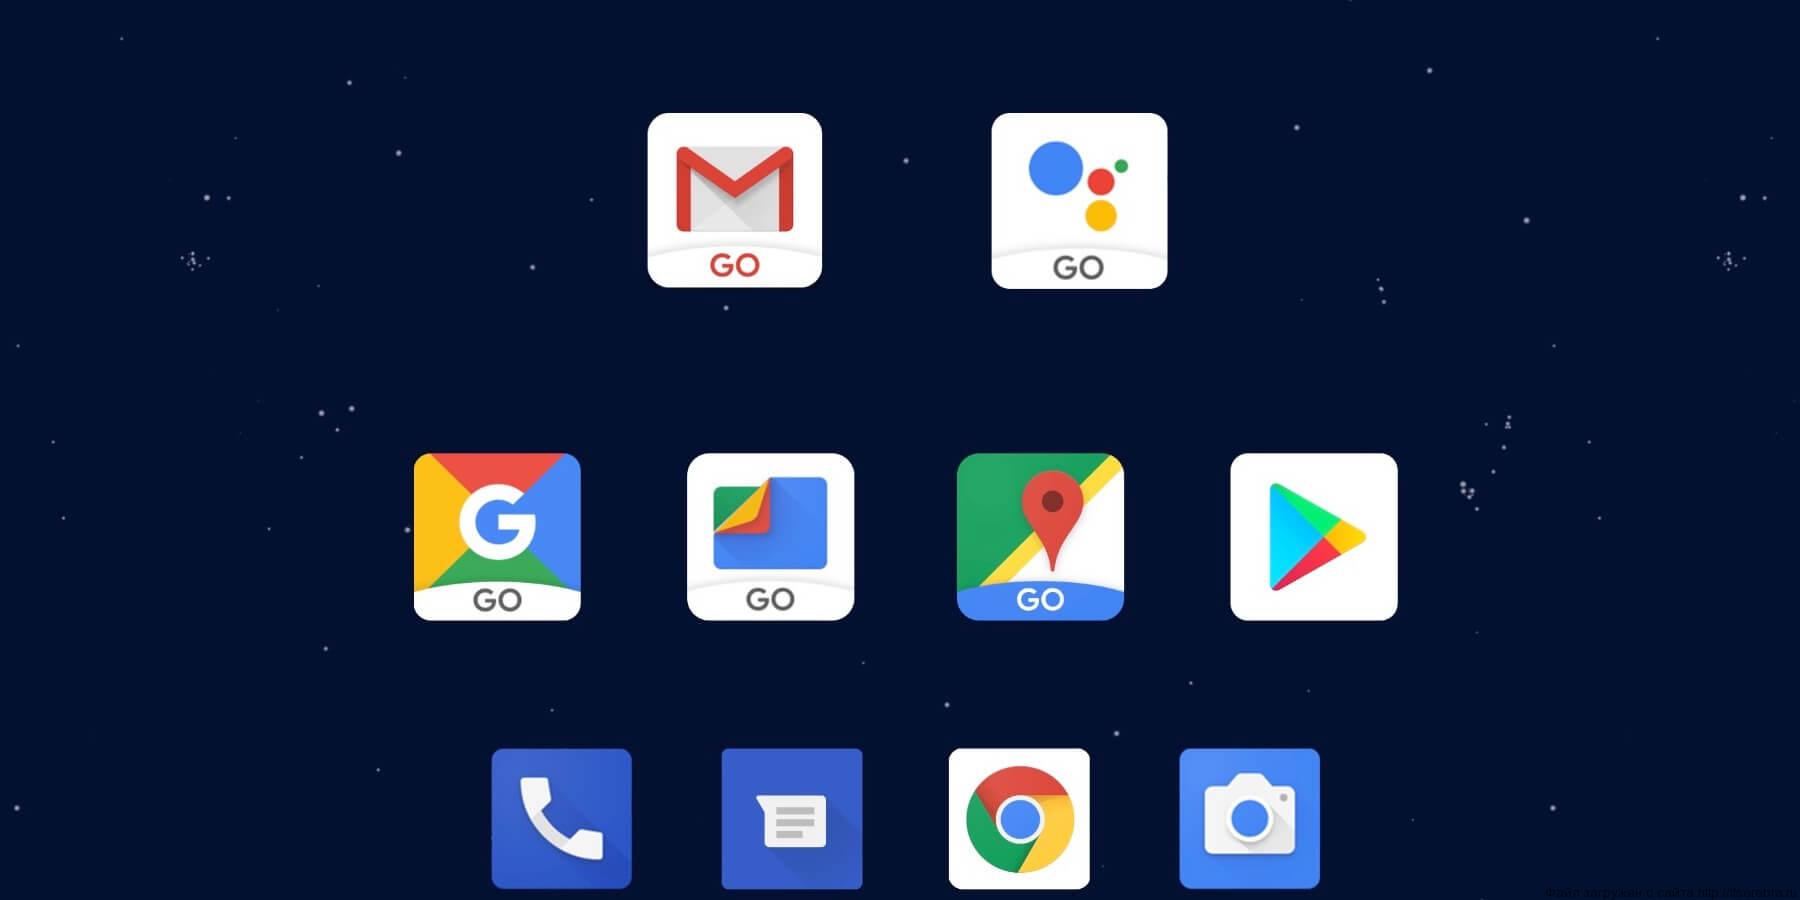 Android Go